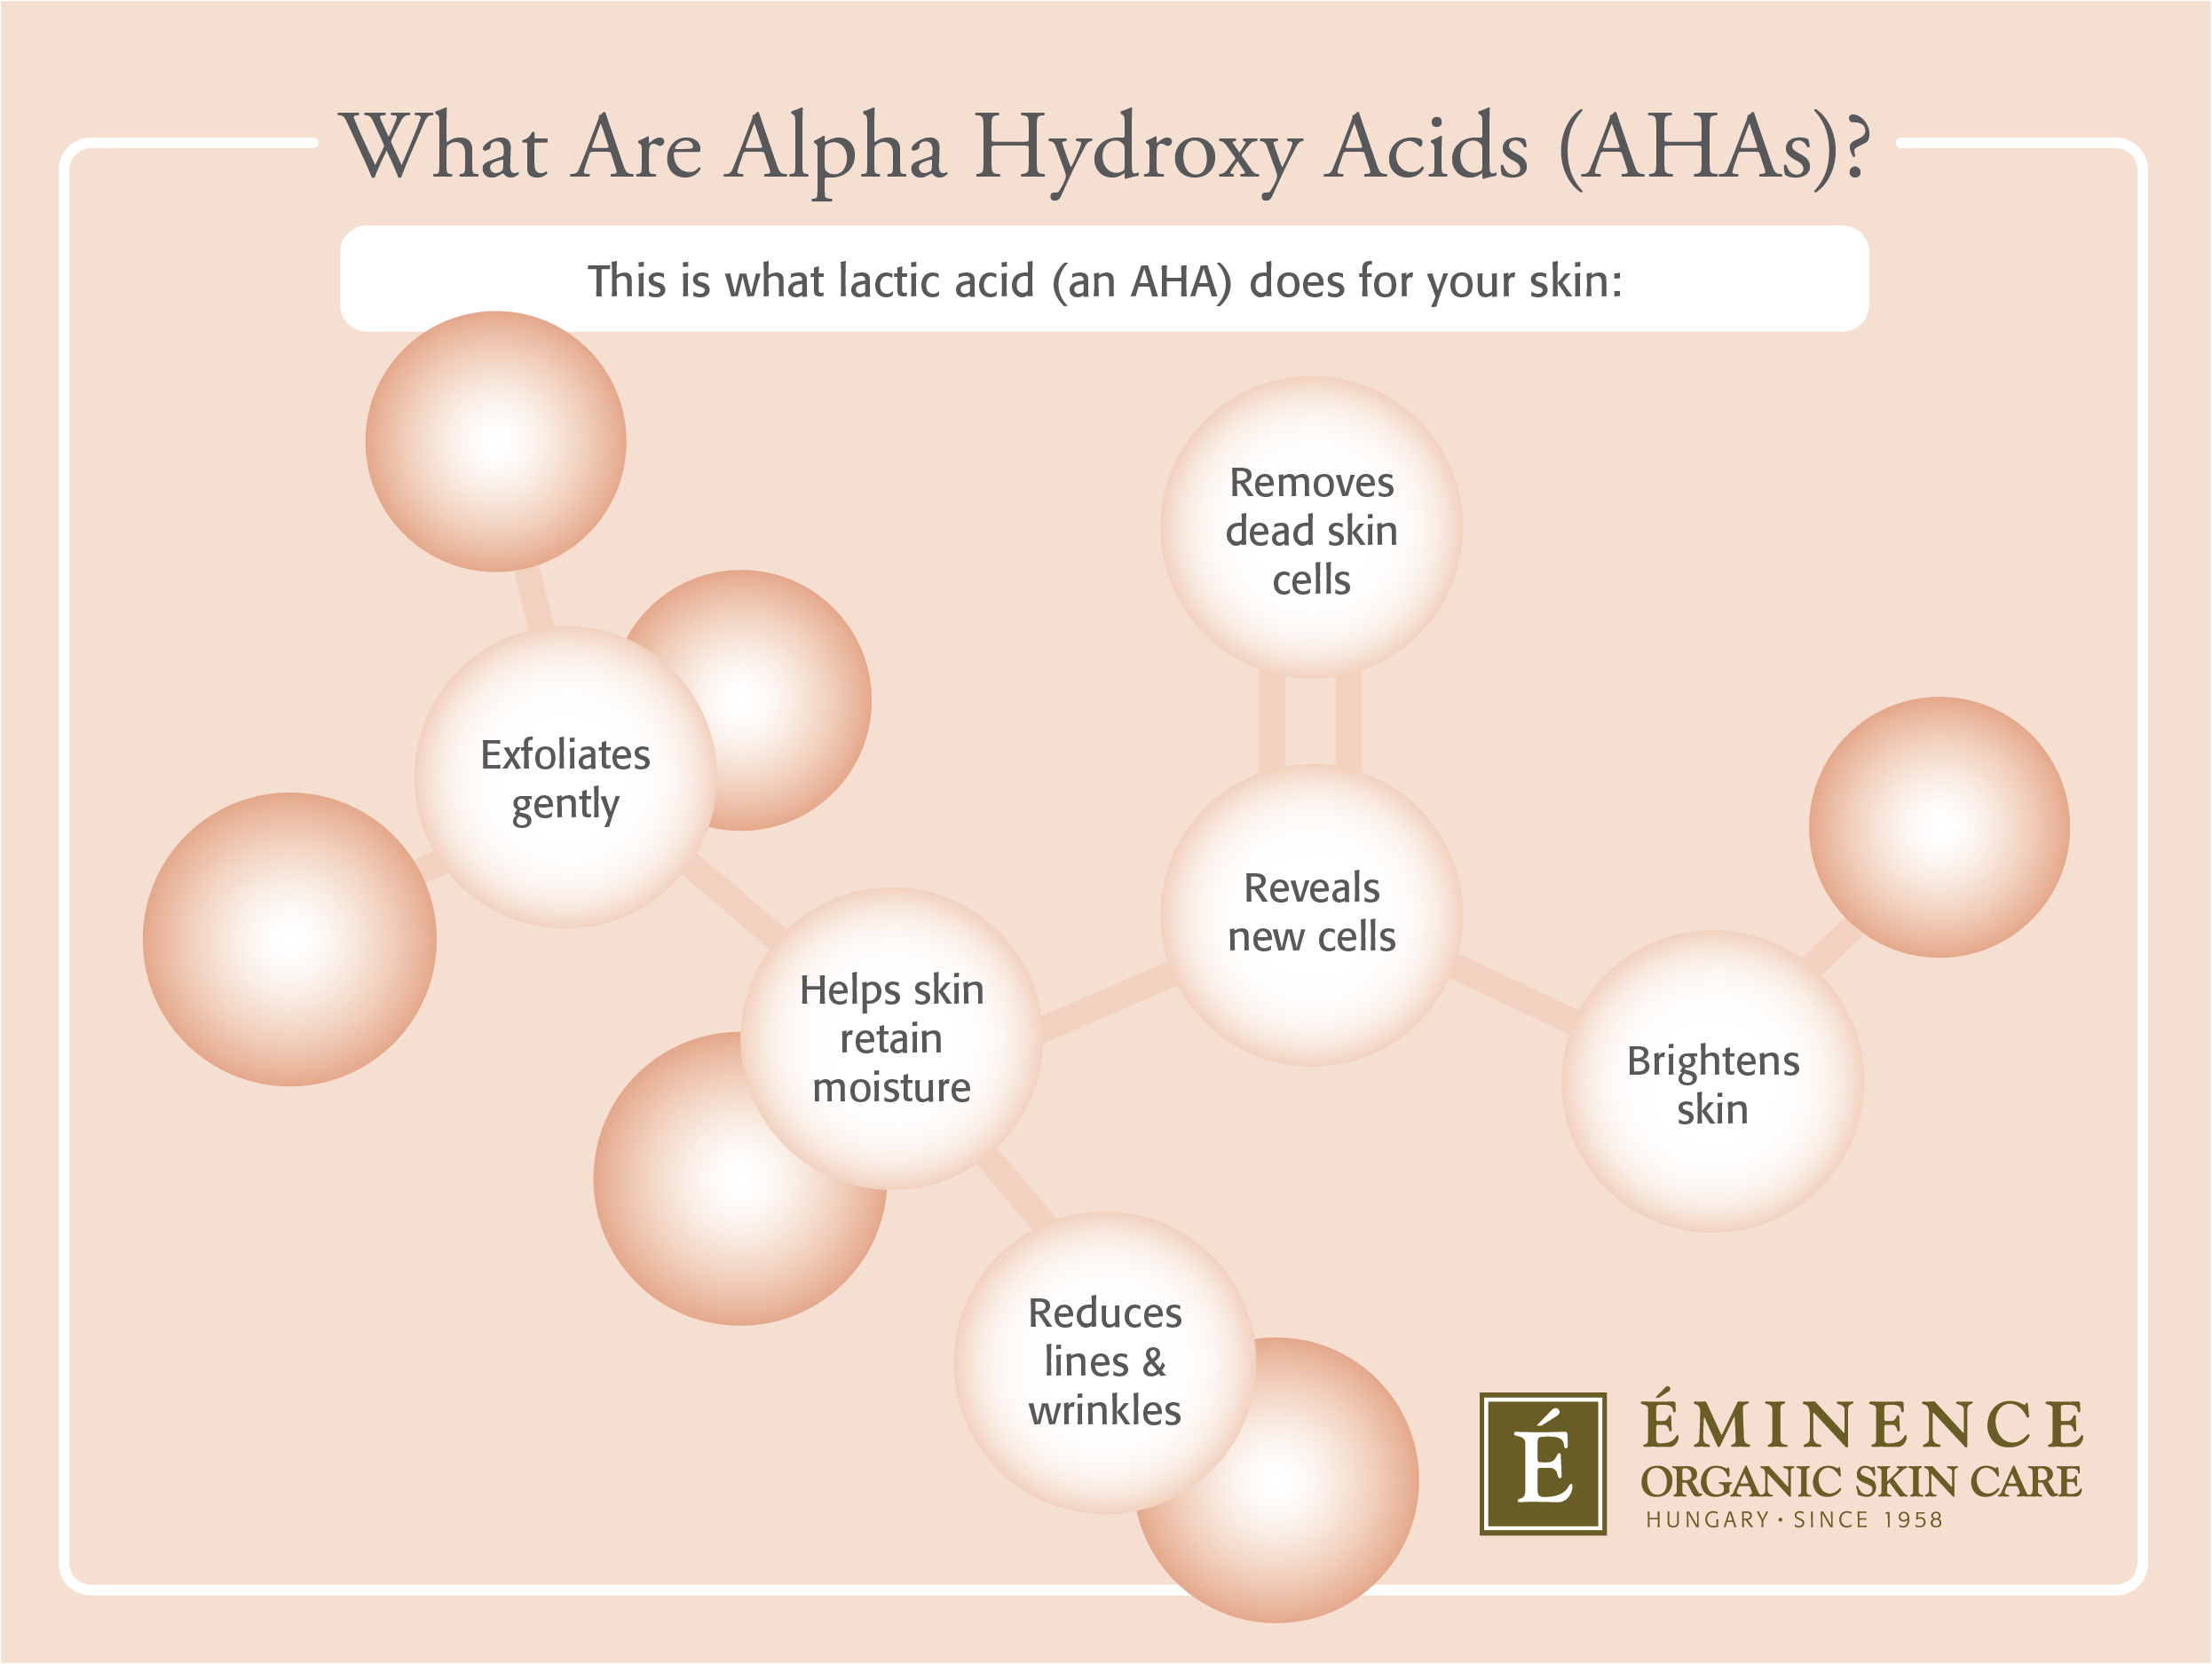 What Alpha Hydroxy Acids (AHAs) can do for your skin